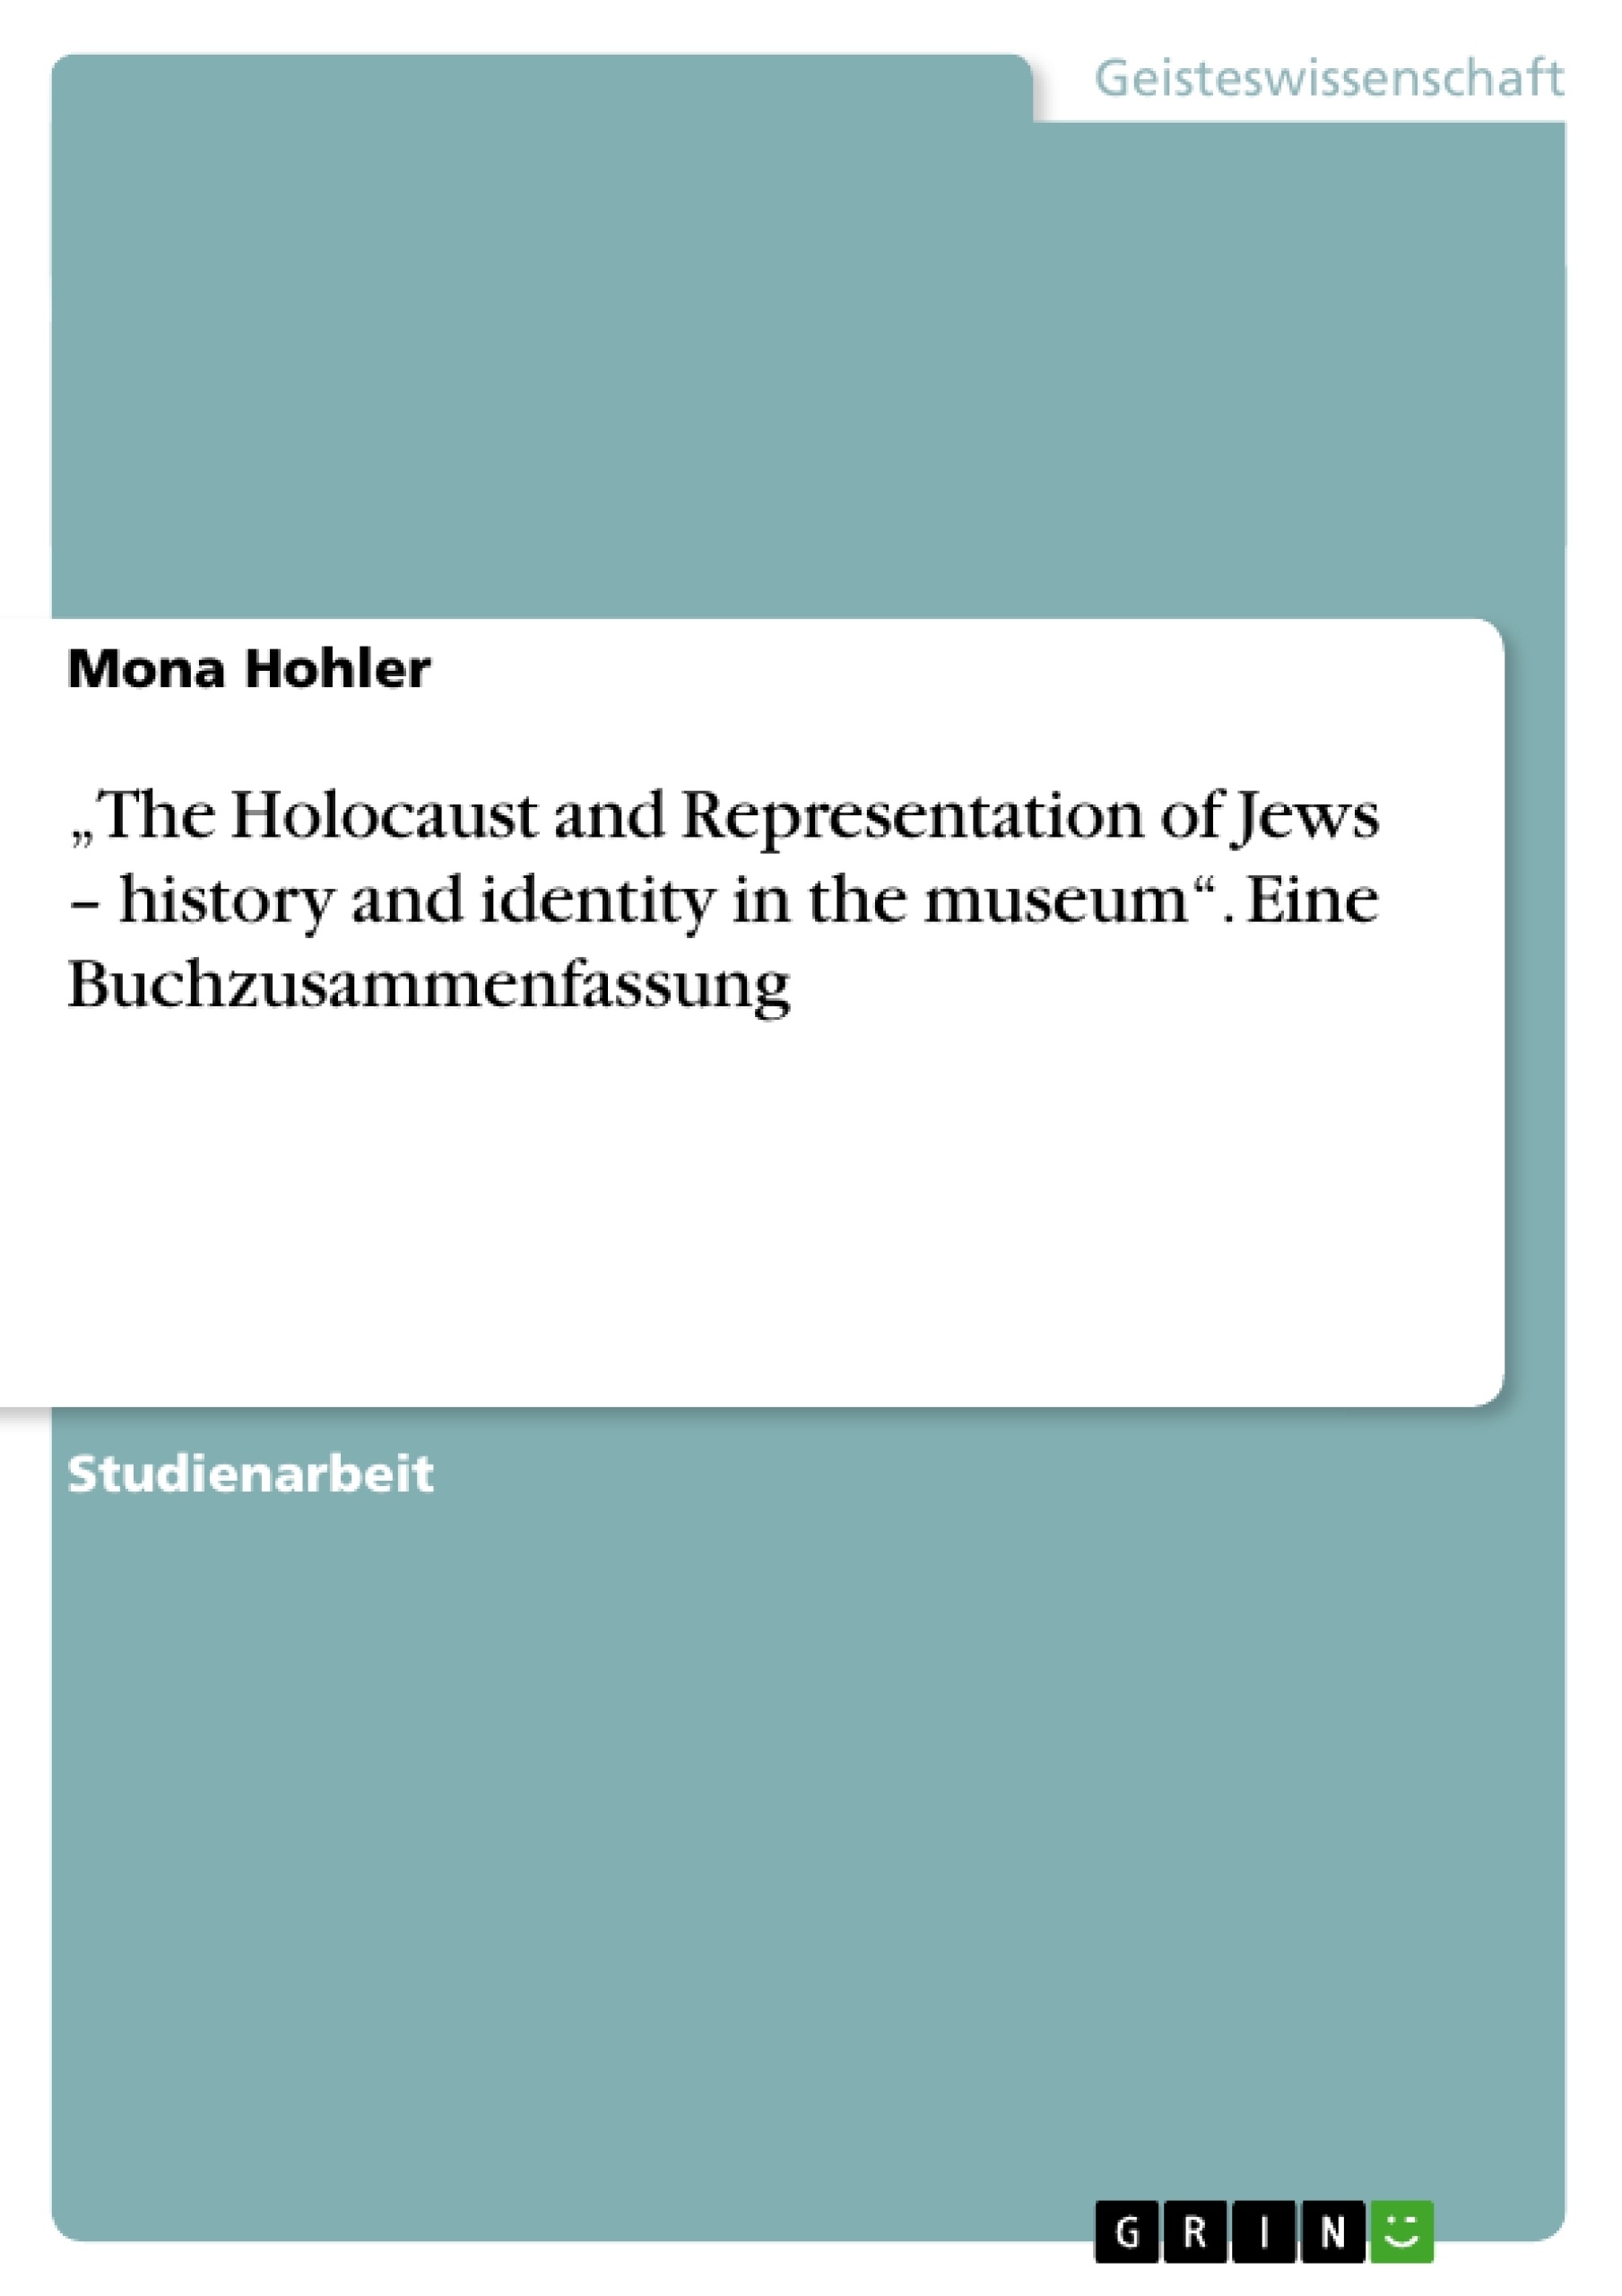 Título: „The Holocaust and Representation of Jews – history and identity in the museum“. Eine Buchzusammenfassung